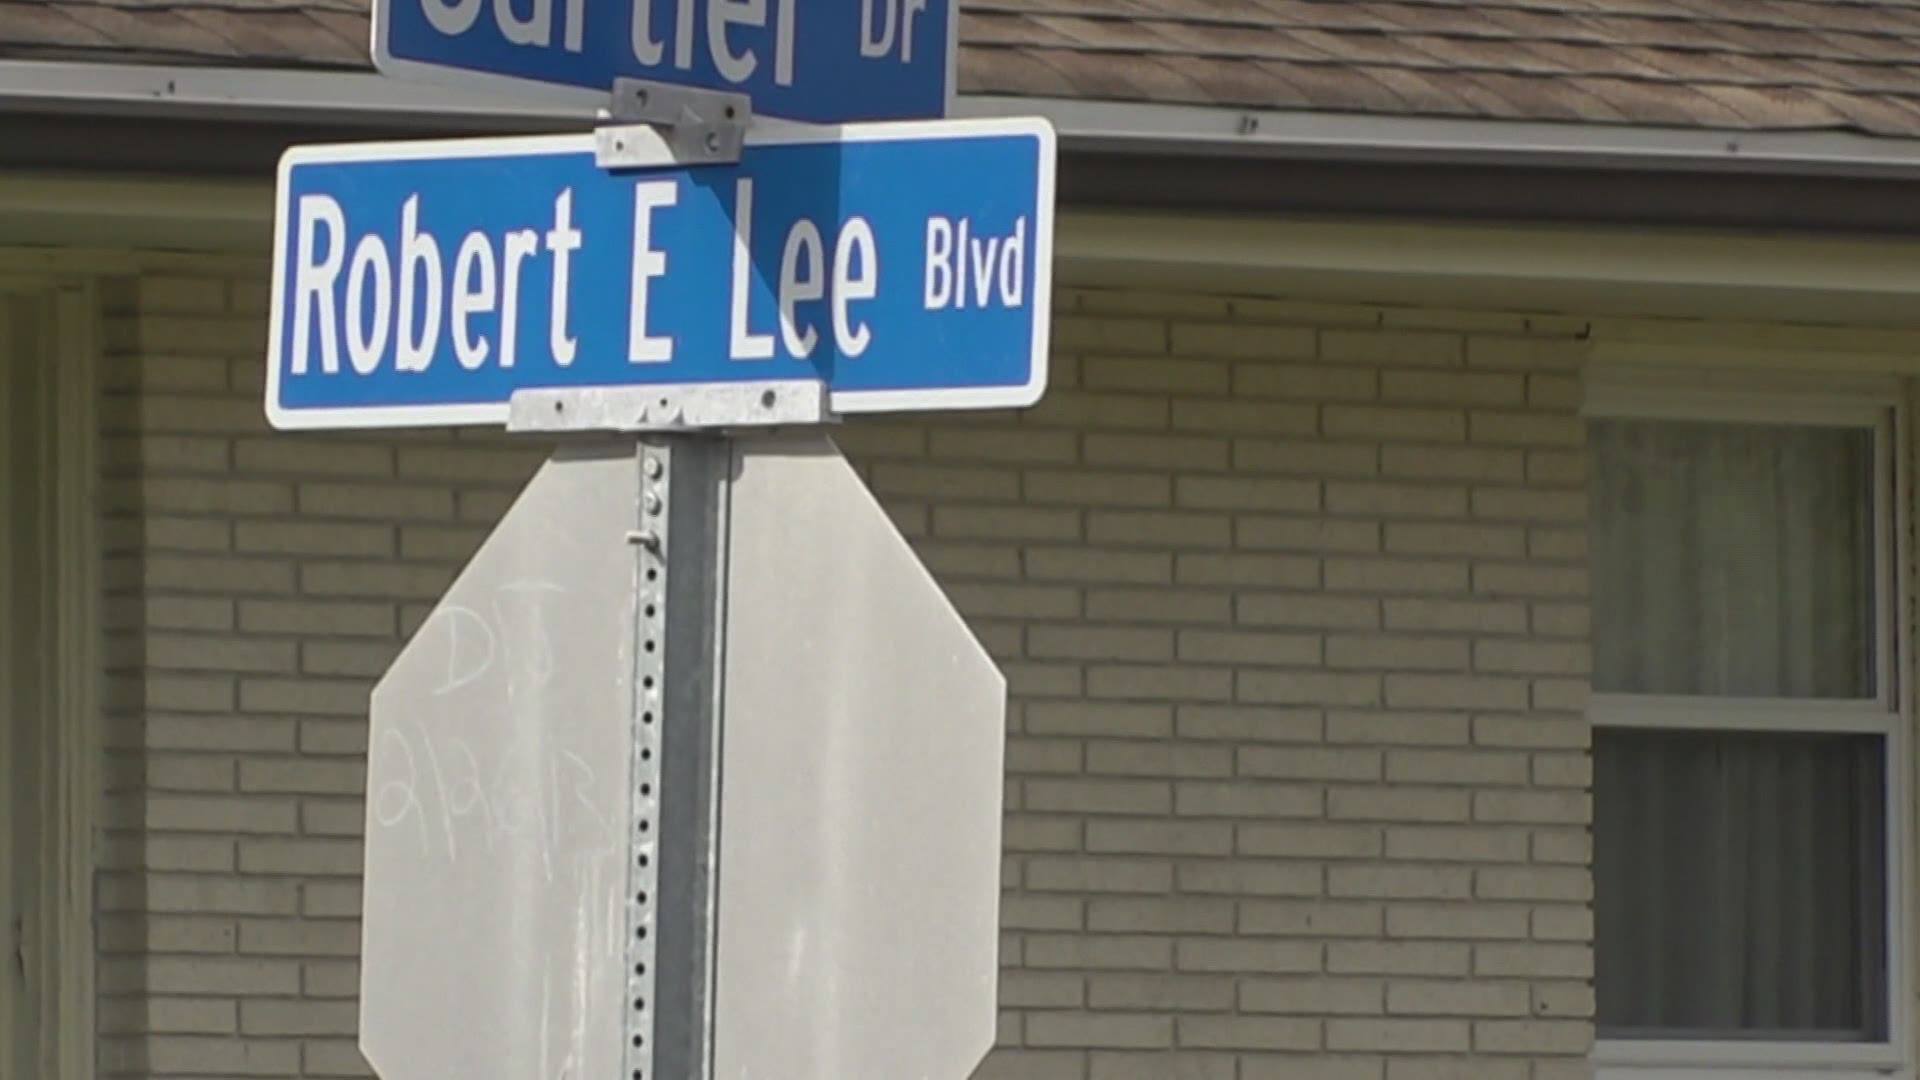 An update to a story from Friday on WWL-TV at 6 pm. about the renaming process for Robert E. Lee Boulevard.